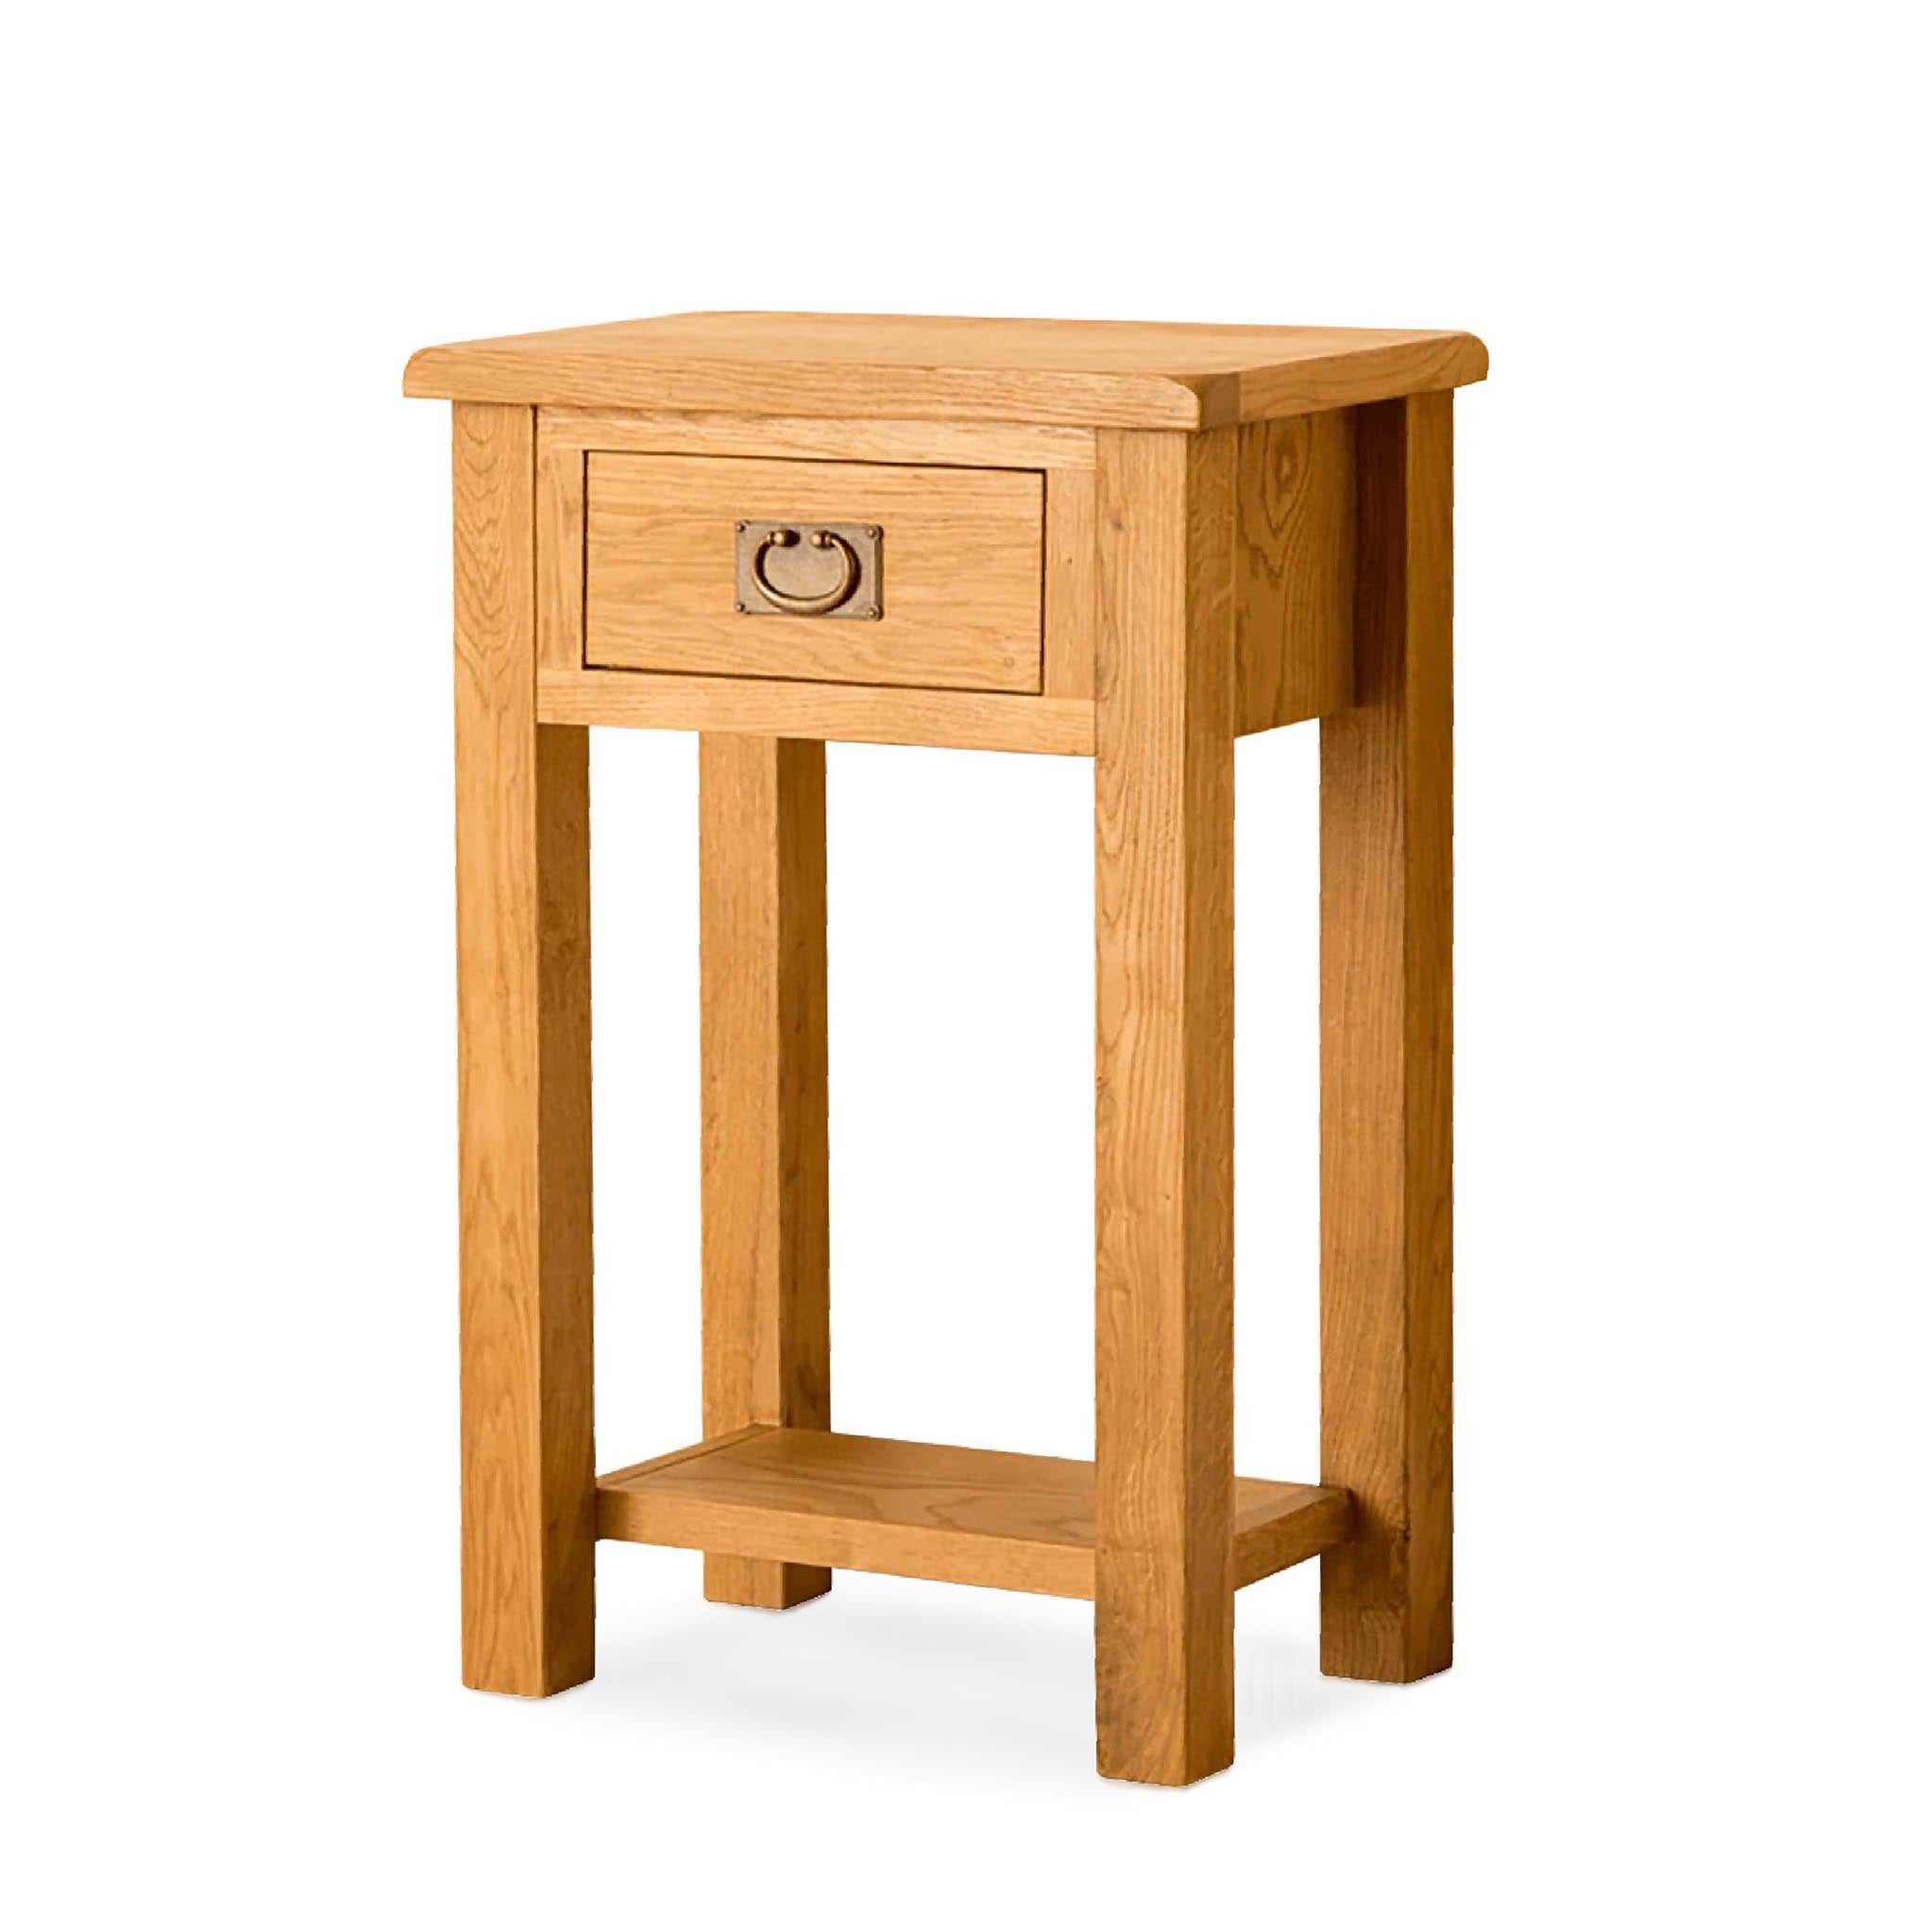 Lanner Waxed Oak Small Console Table Hall Stand Drawers Rustic Oak